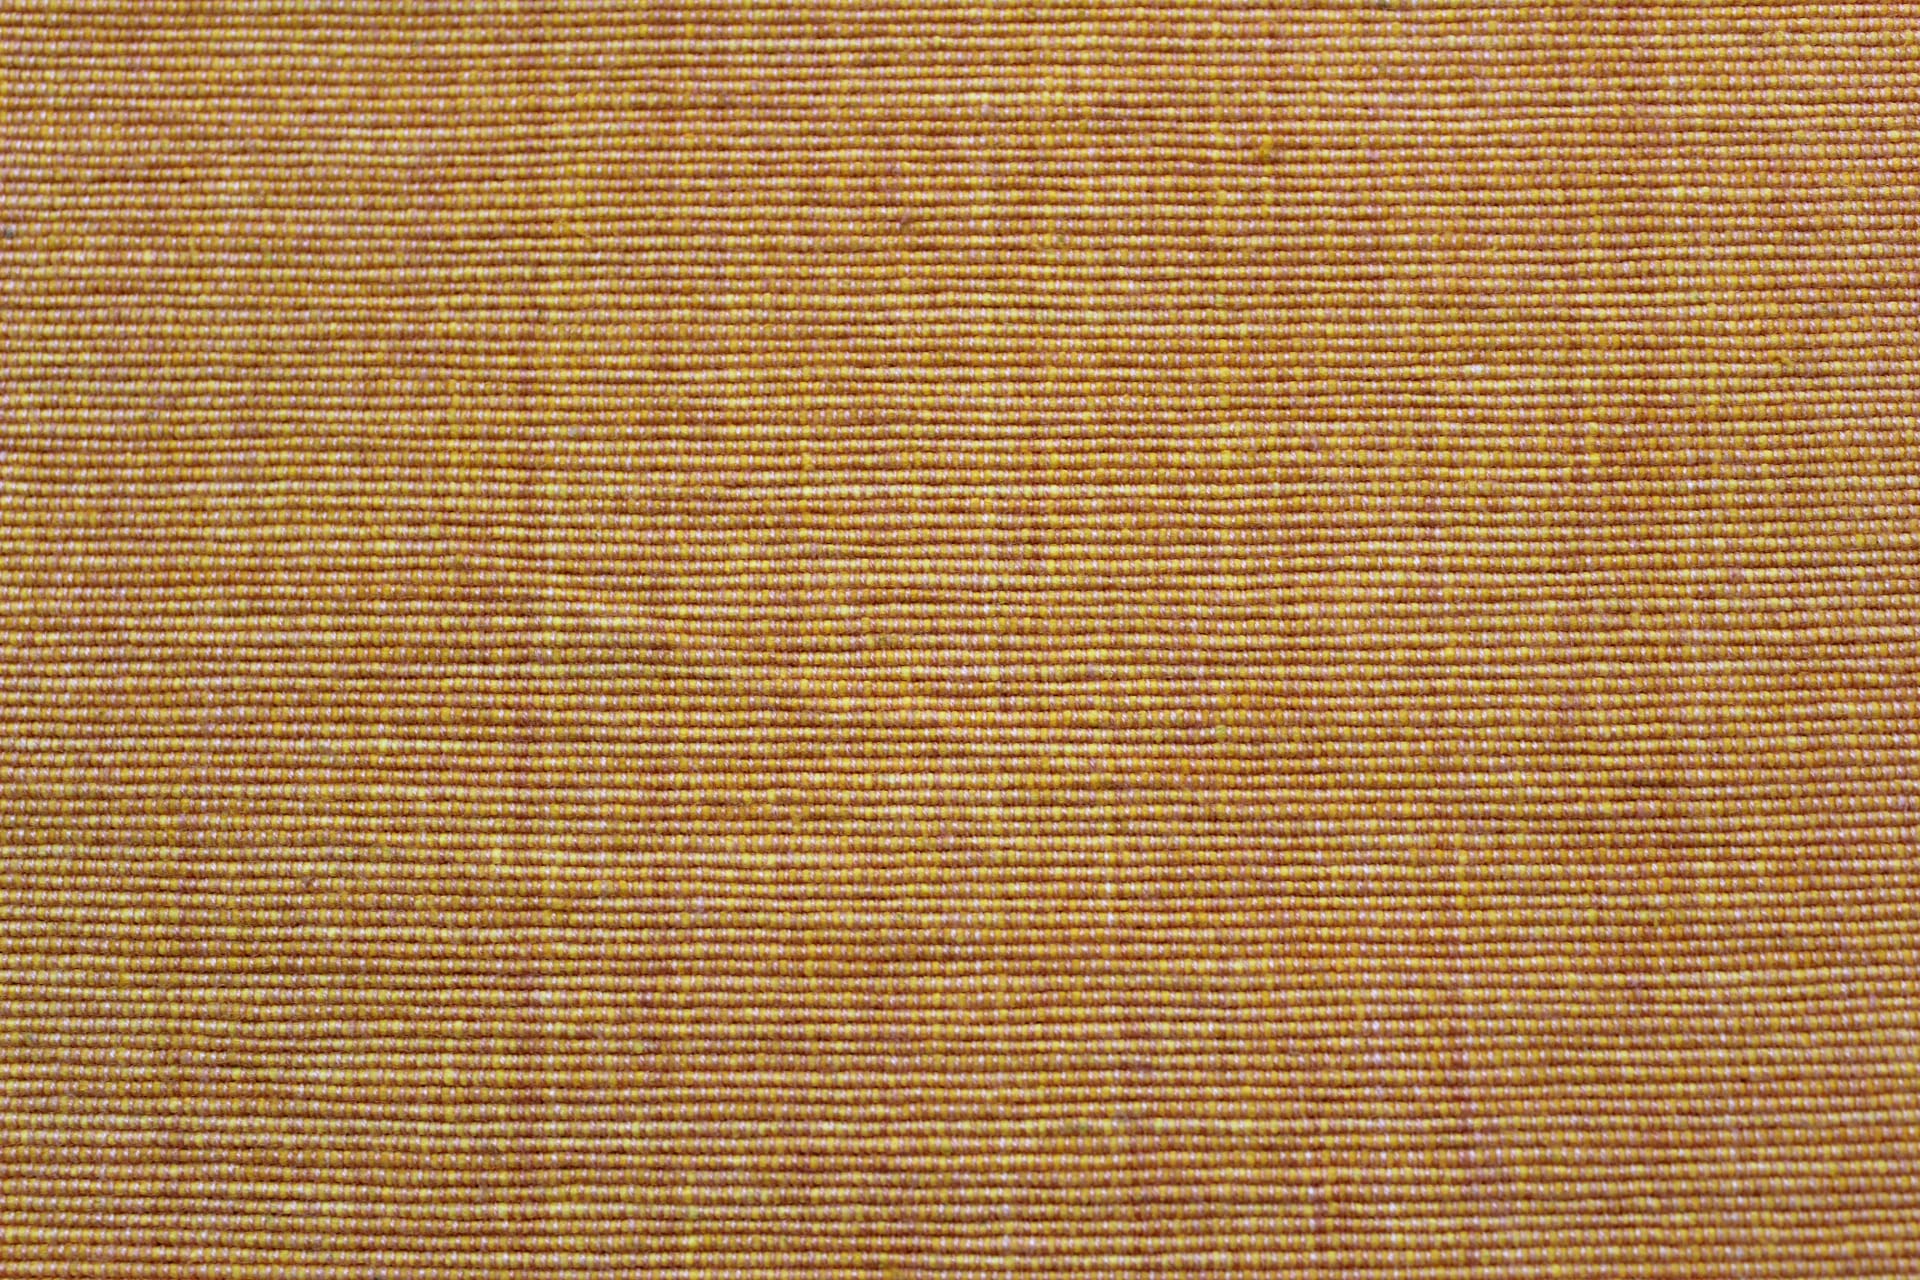 Mustard Handloom Corded Weave 330 GSM Plain Cotton Fabric (122 cms) online in India